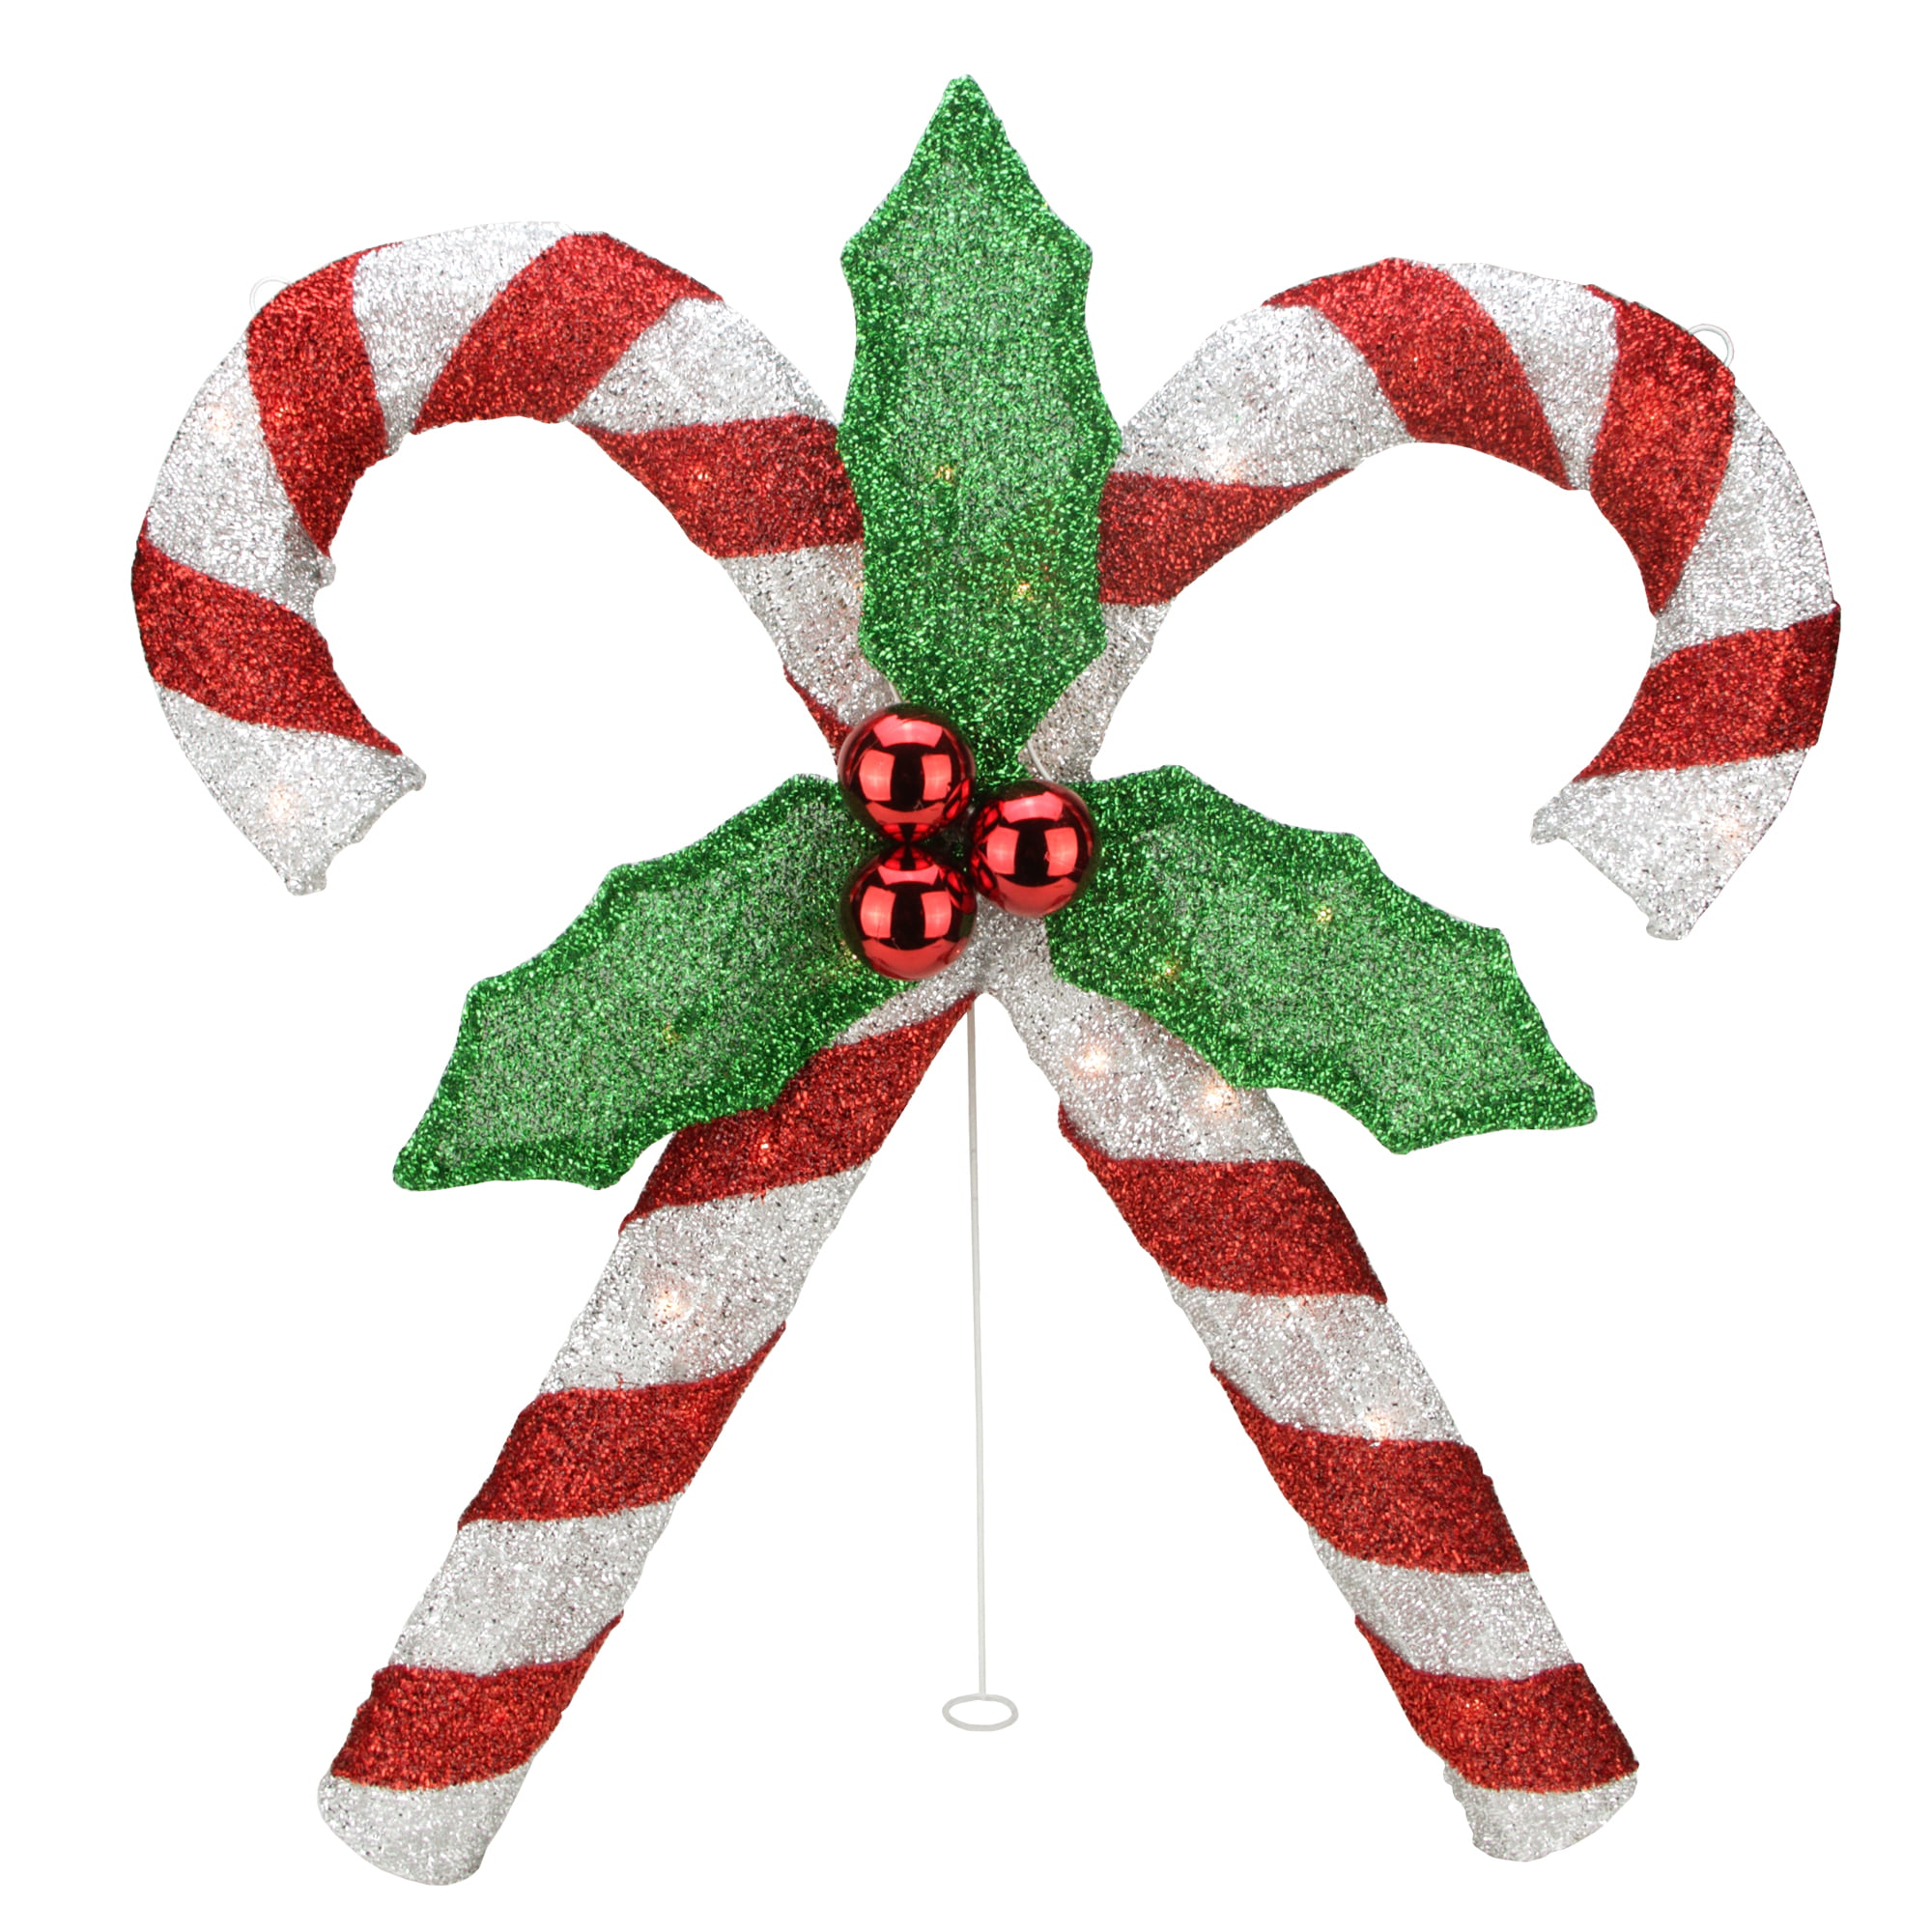 26" Red and White Double Candy Cane Lighted Outdoor